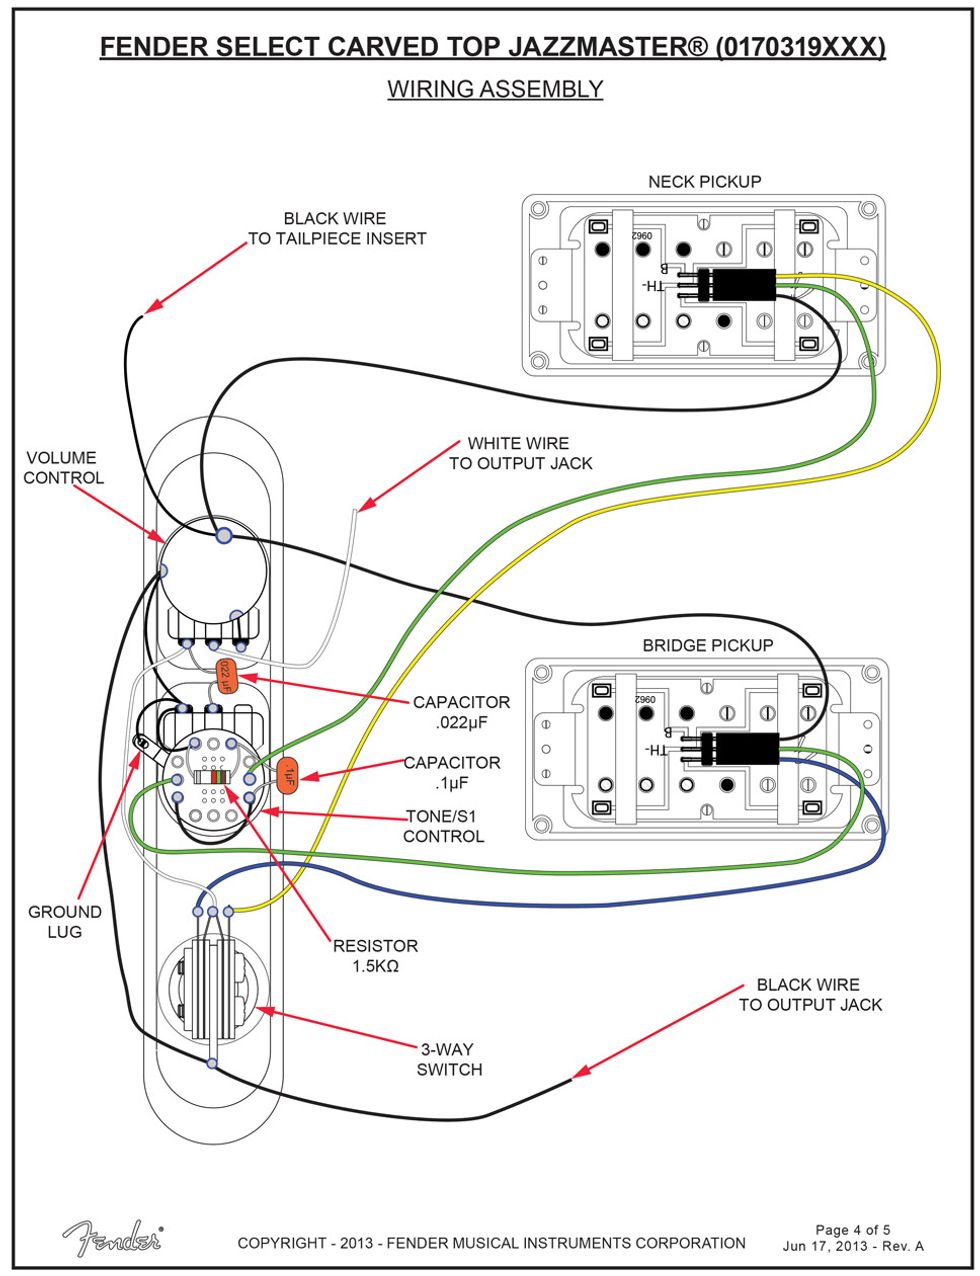 Wiring Diagram Two Single Coils Humbucker 5 Way And 2 Way from www.premierguitar.com